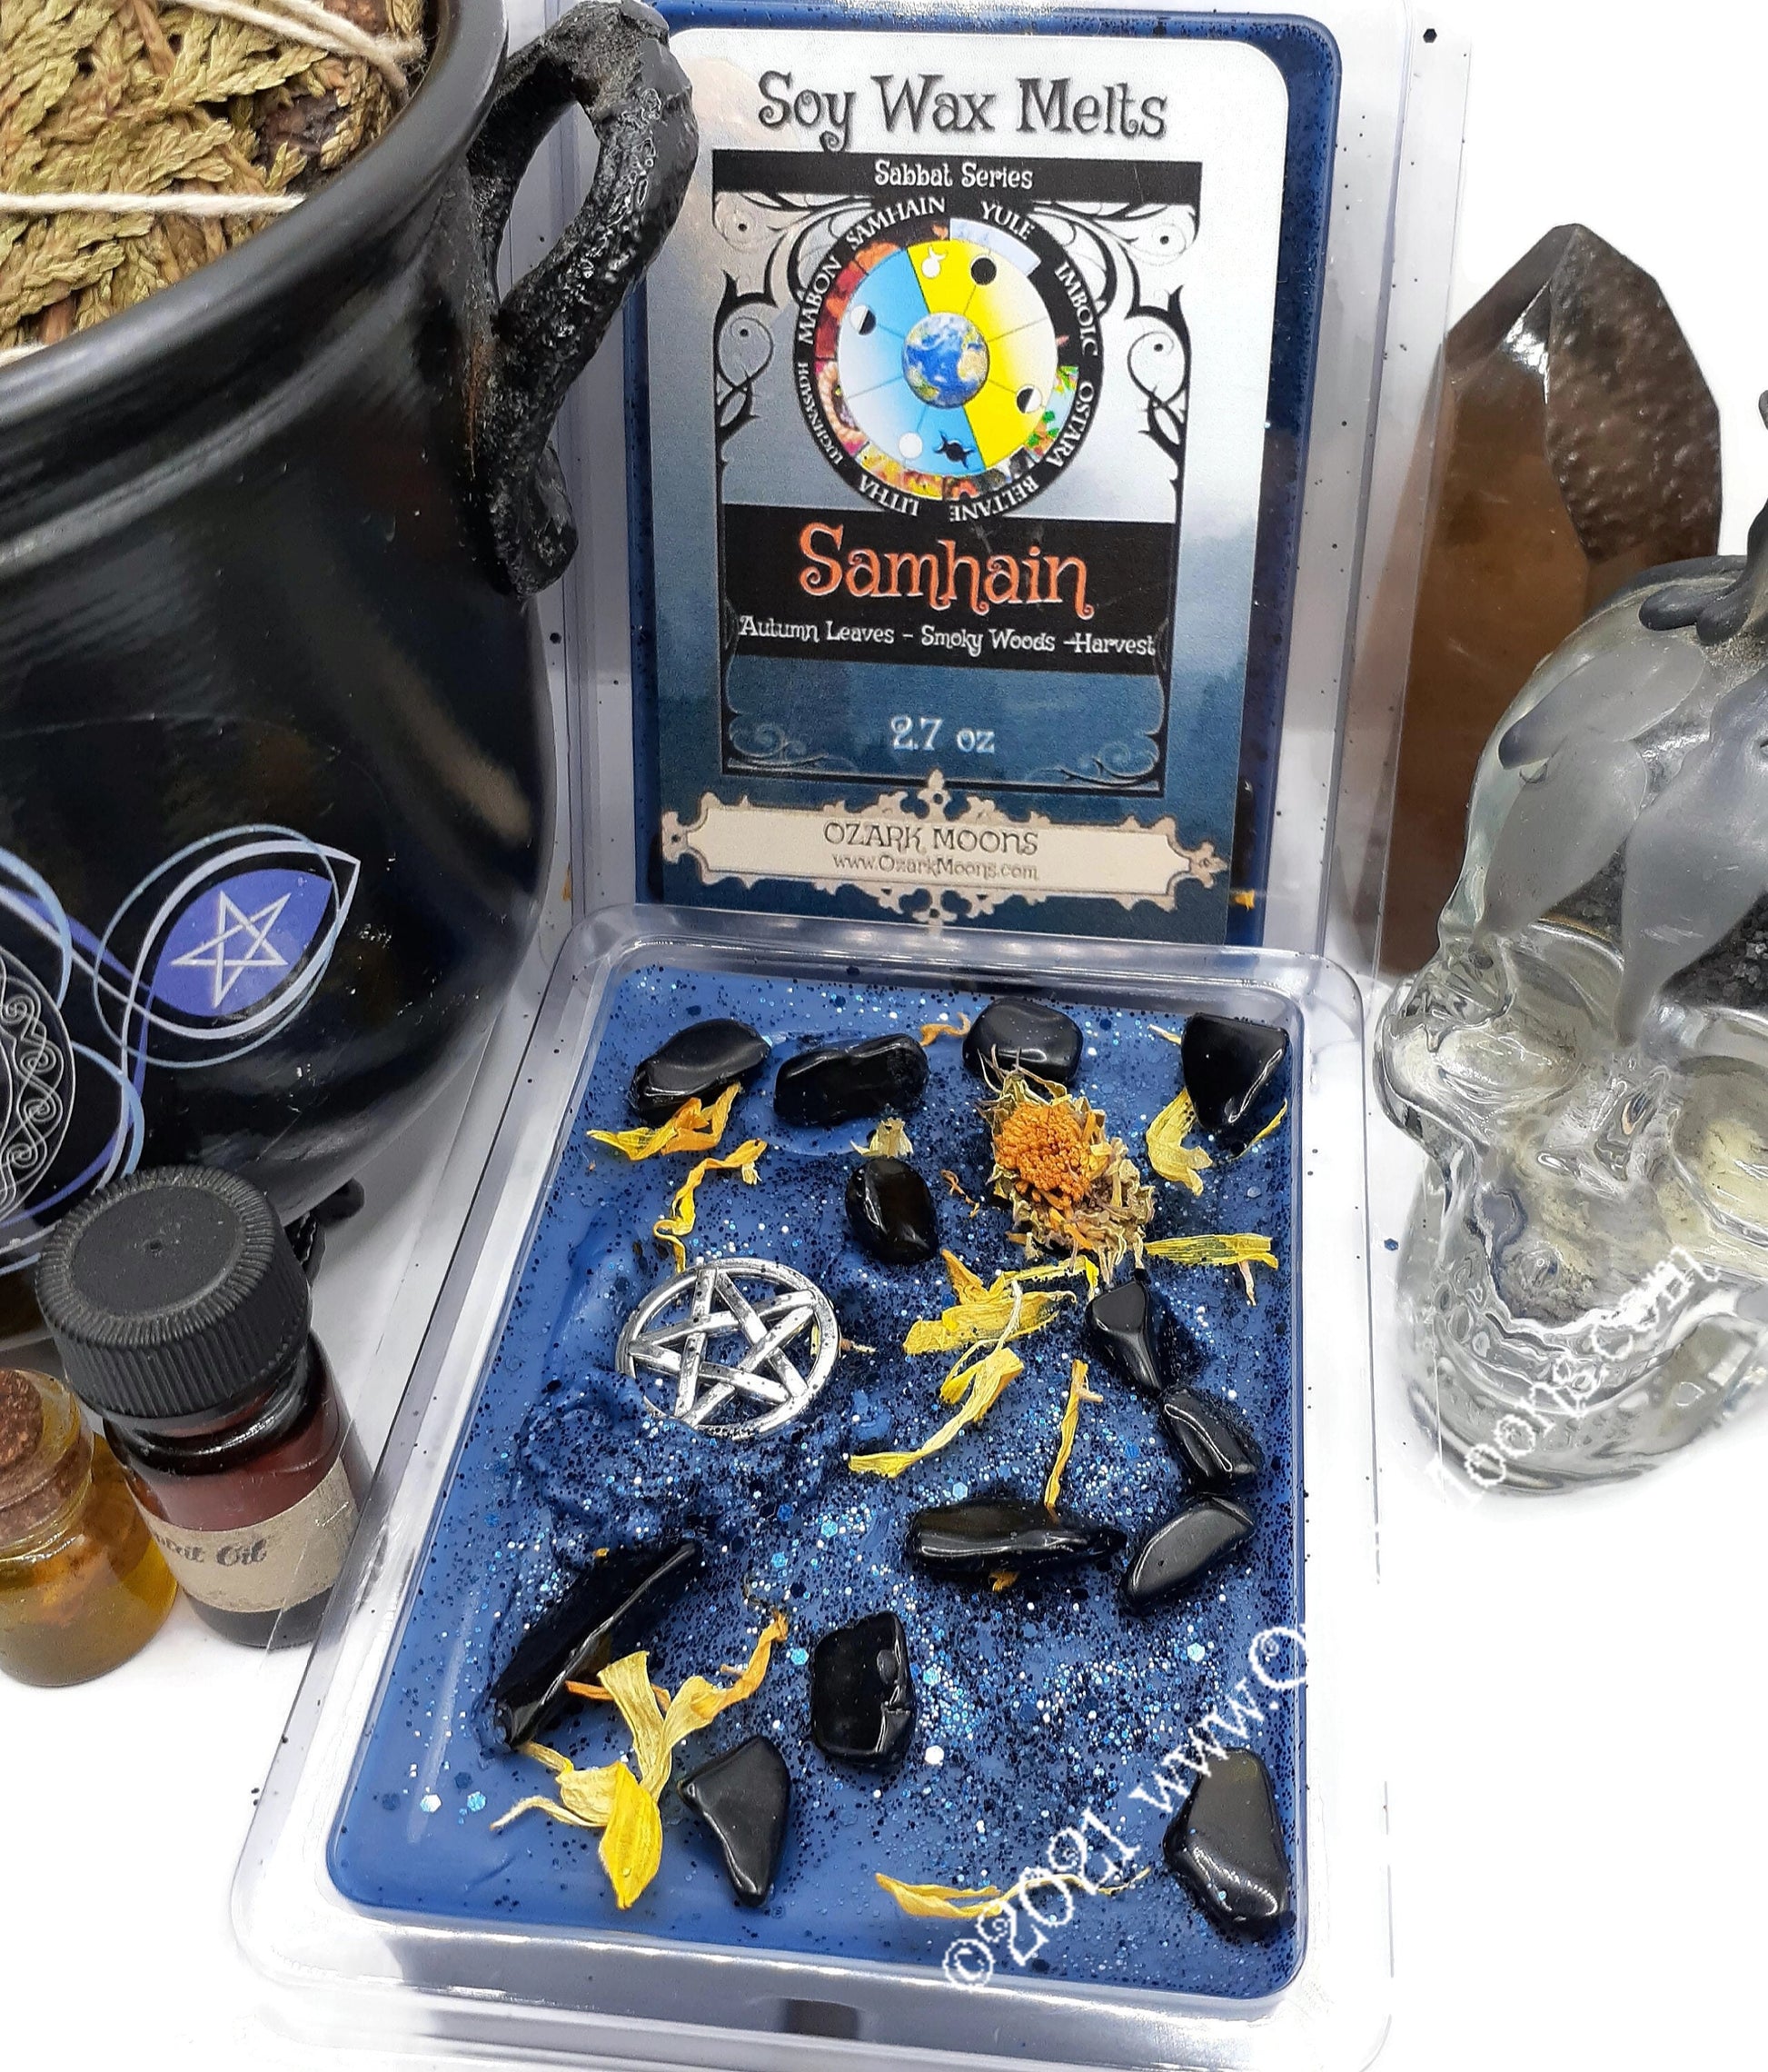 SAMHAIN Sabbat Candle Tins or Wax Melts with Black Obsidian and Calendula Petals Black Soy Candle Tarts Highly Scented - Pagan Wiccan Wicca